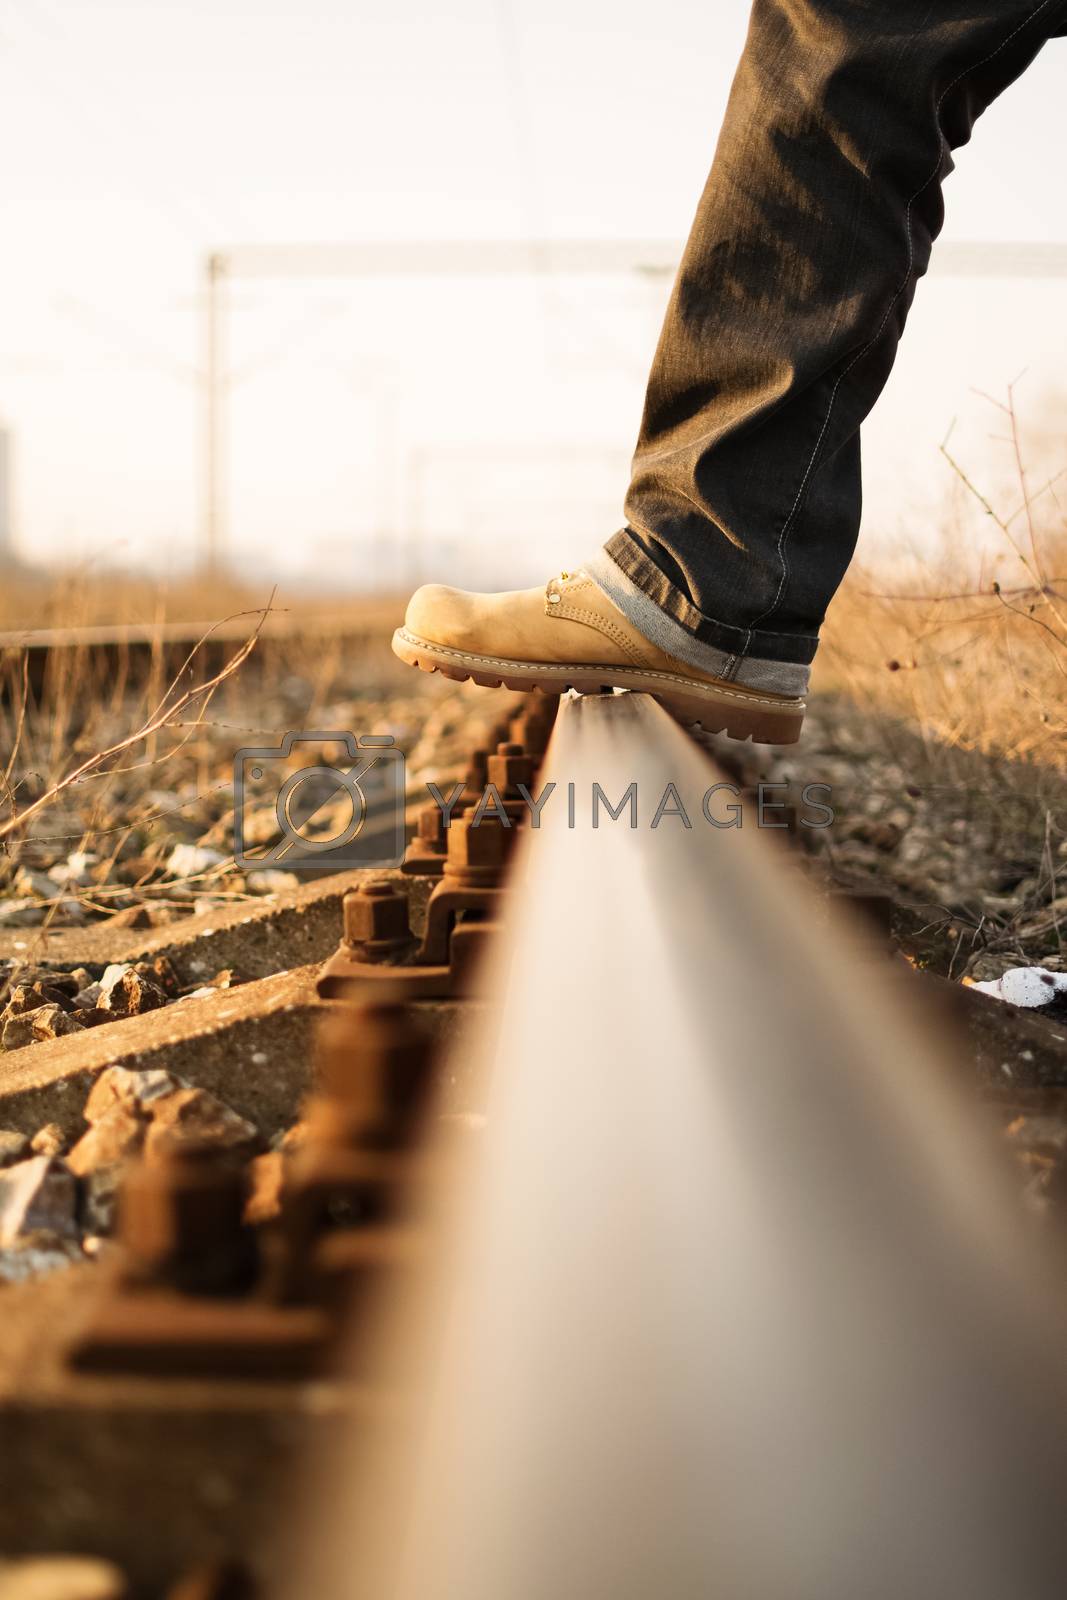 Royalty free image of Stepping over the train tracks by Mendelex